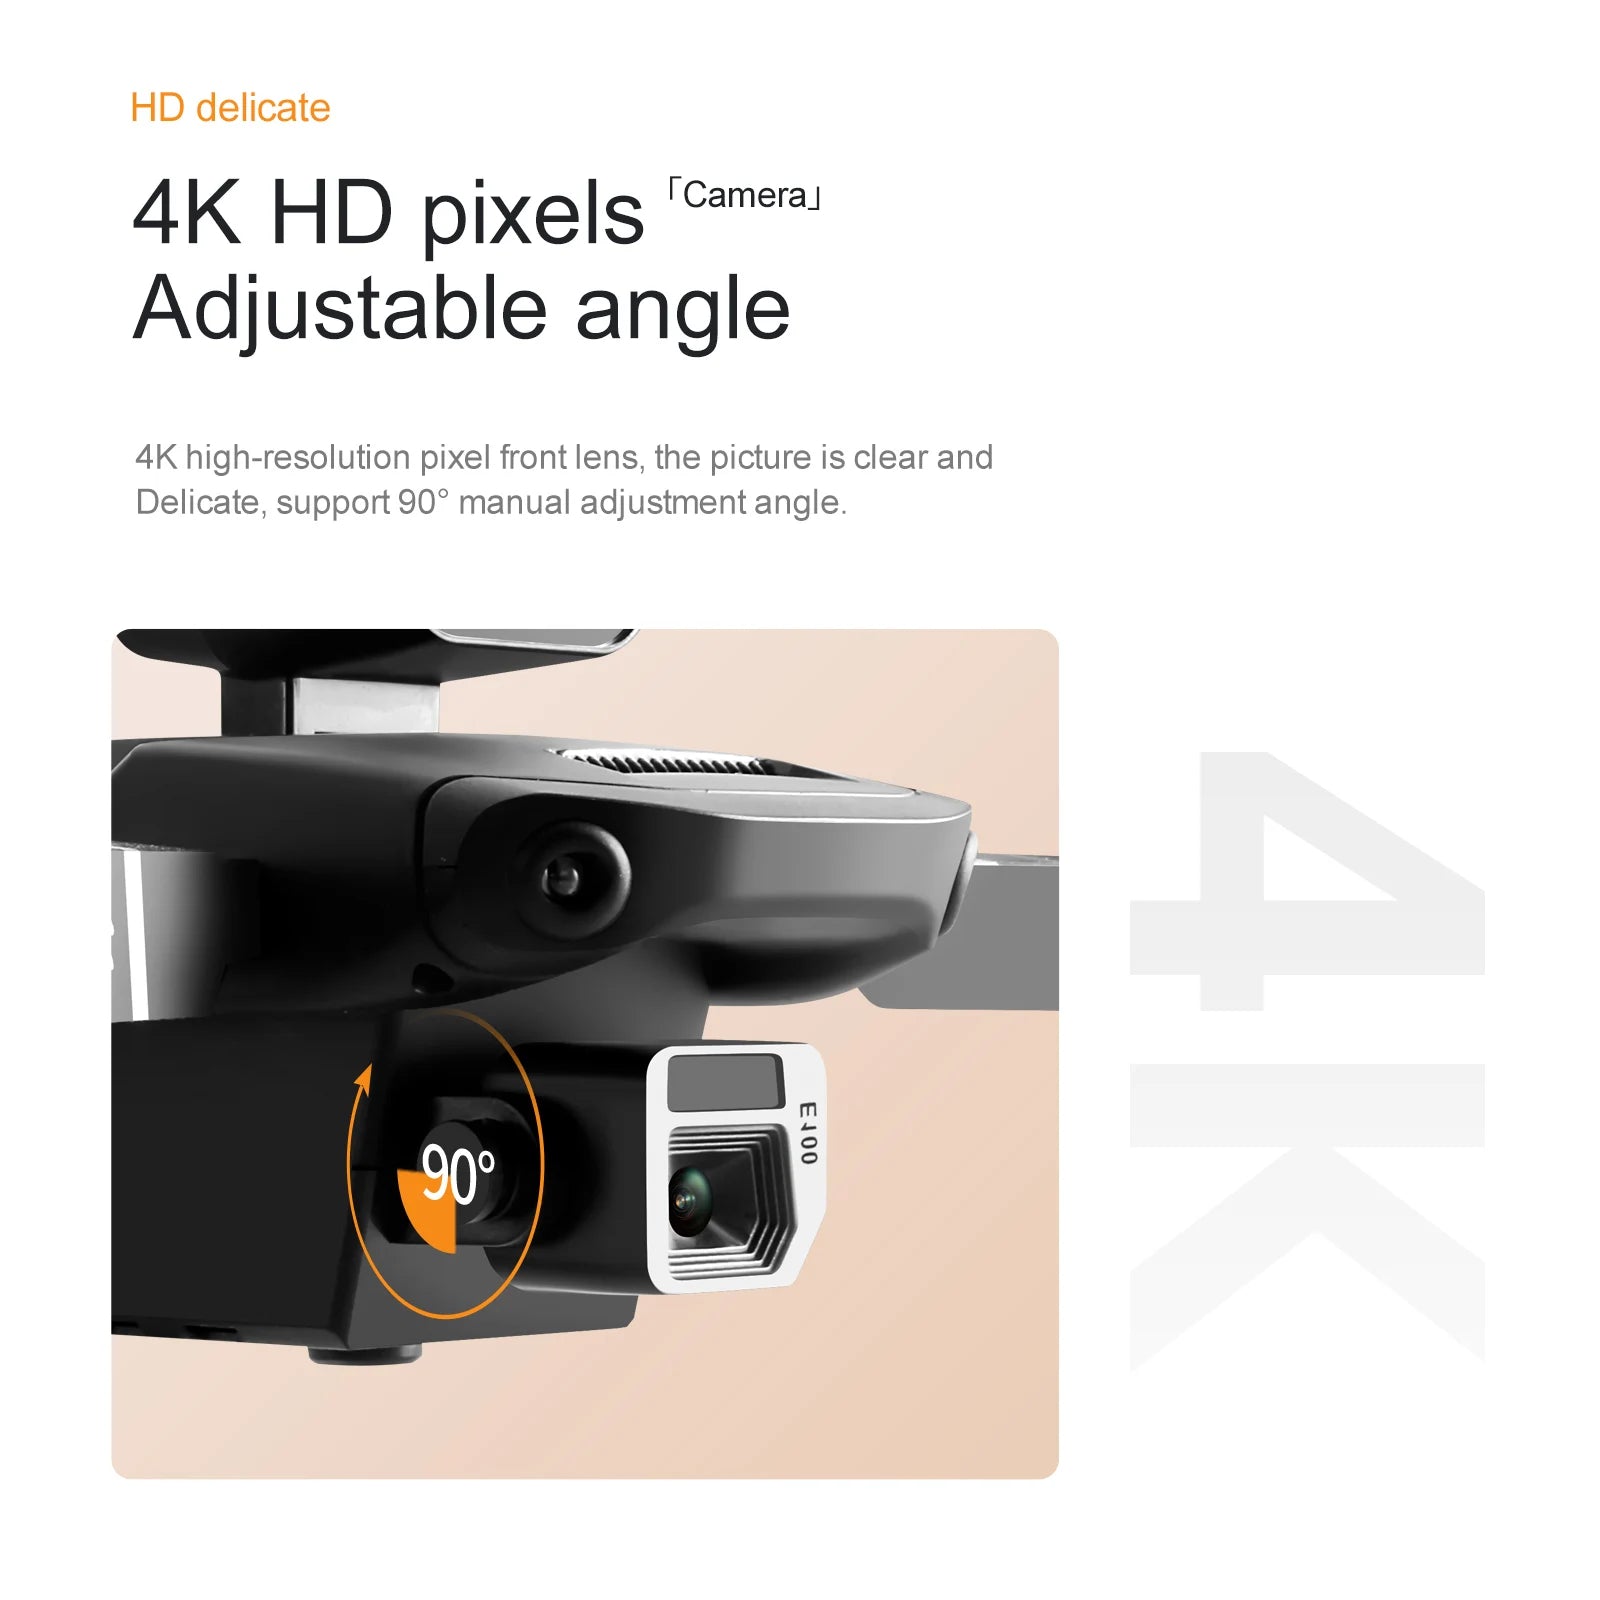 E100 Drone - 4K Dual HD Camera, E100 Drone, the picture is clear and delicate, support 905 manual adjustment angle: